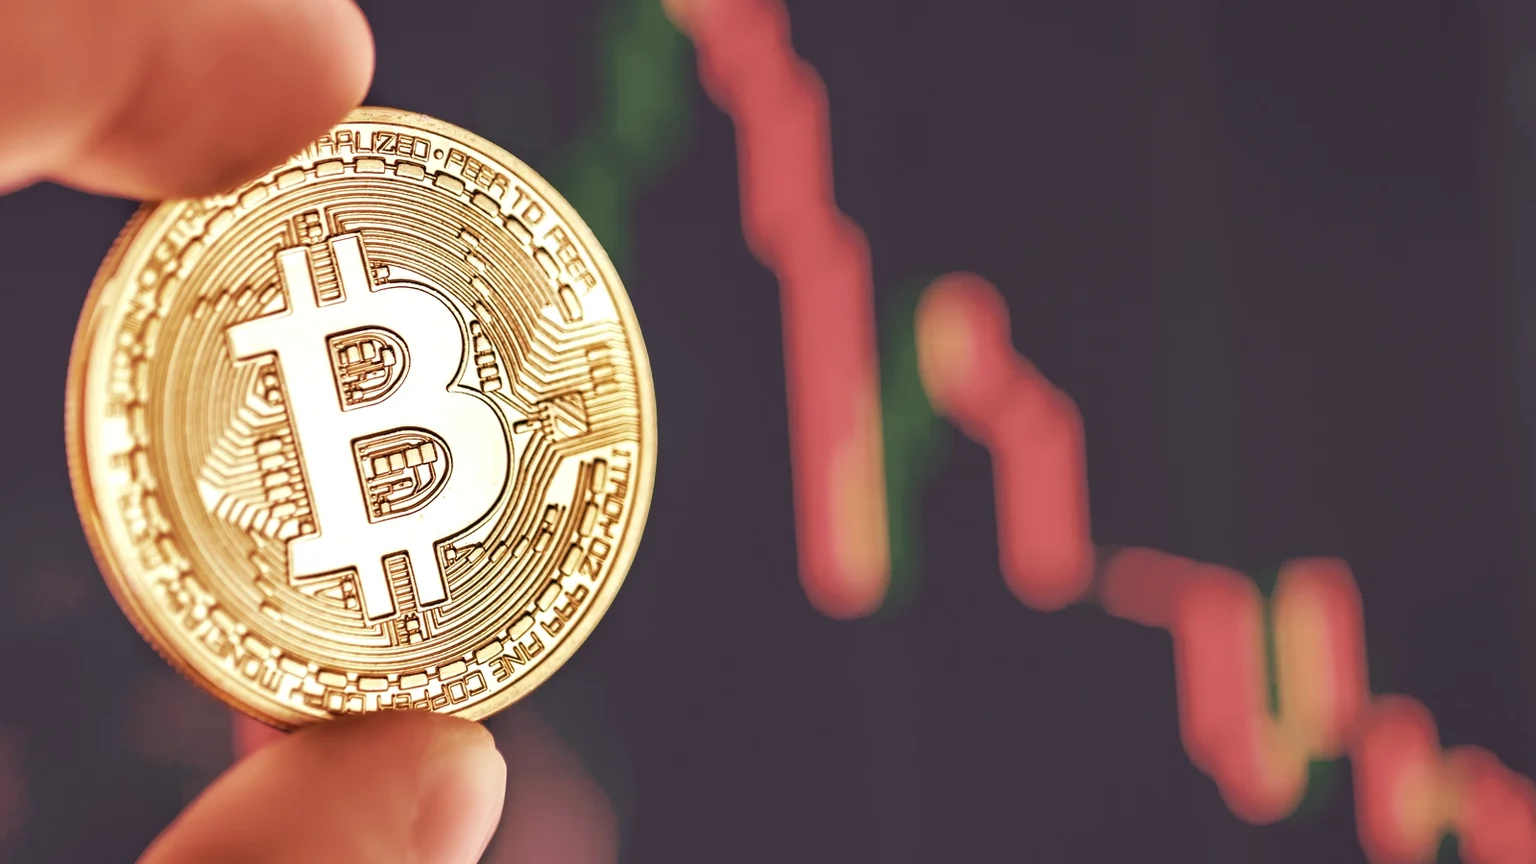 A big day for Bitcoin. Image: Shutterstock